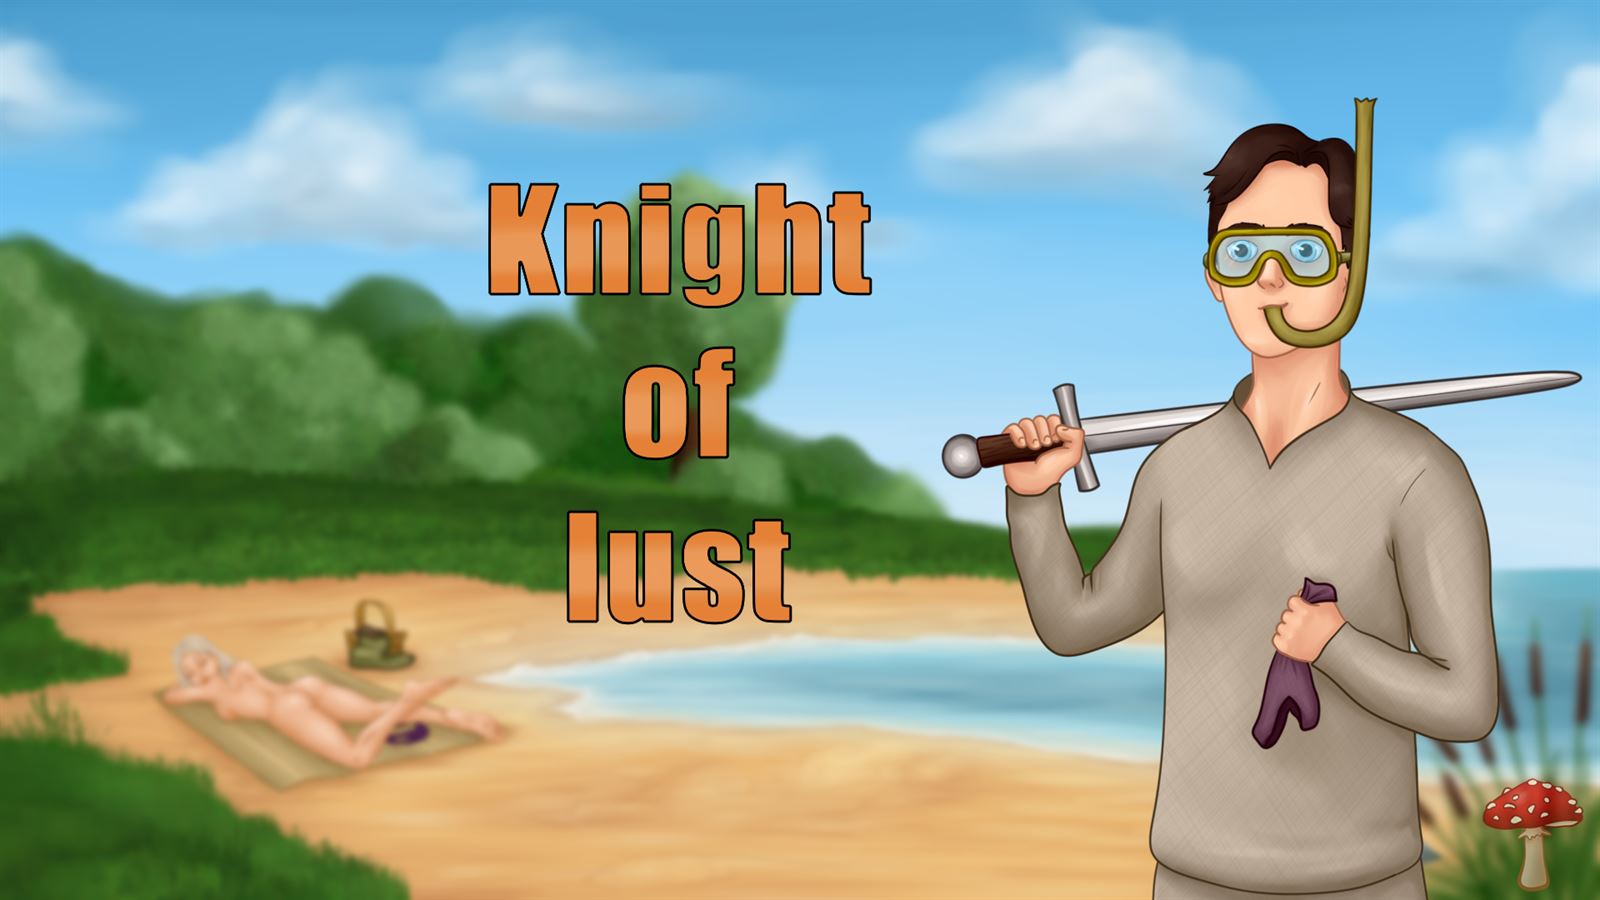 Knight of lust porn xxx game download cover